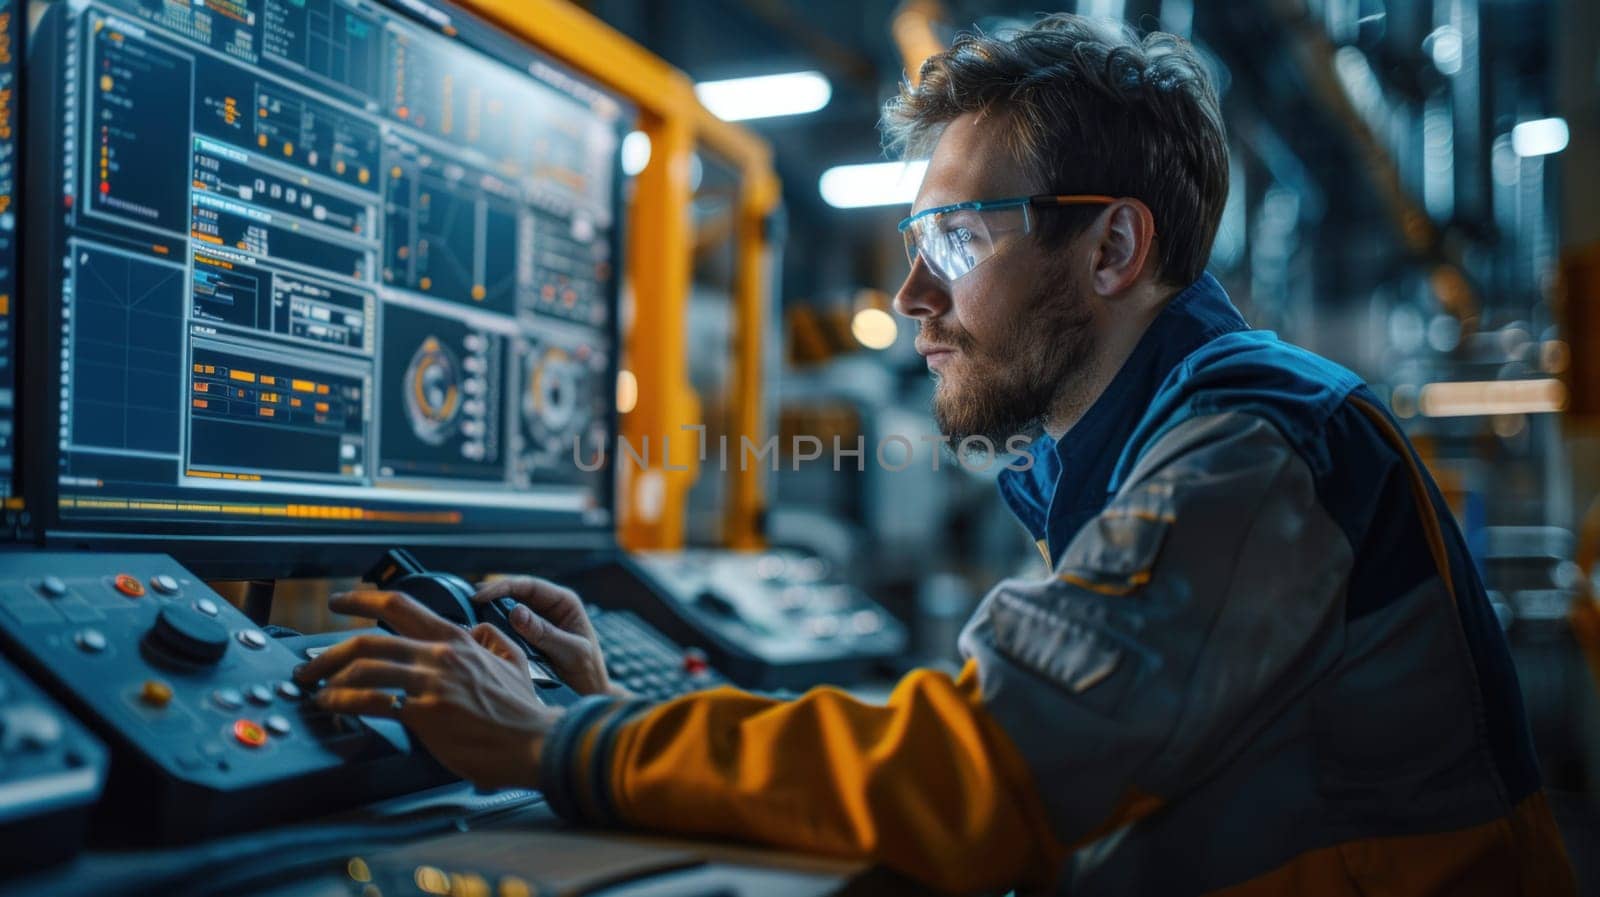 Man Operating Computer in Factory by but_photo